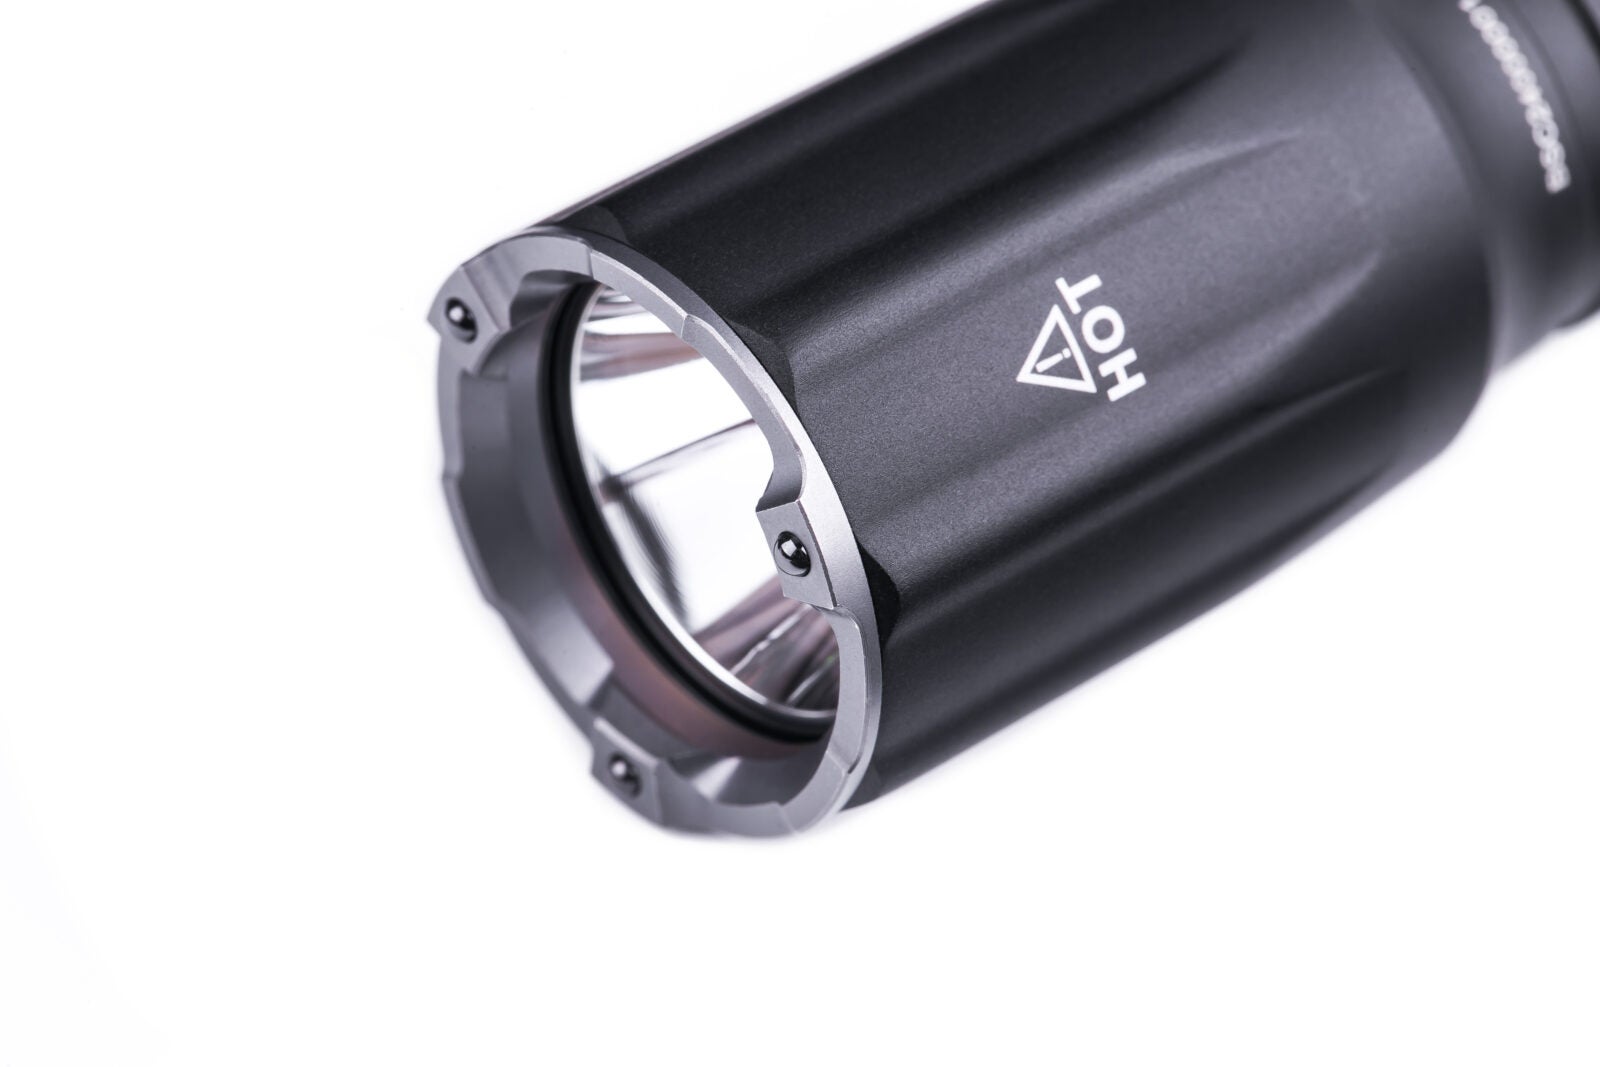 NEW from NEXTORCH - the TA30C Tactical Flashlight